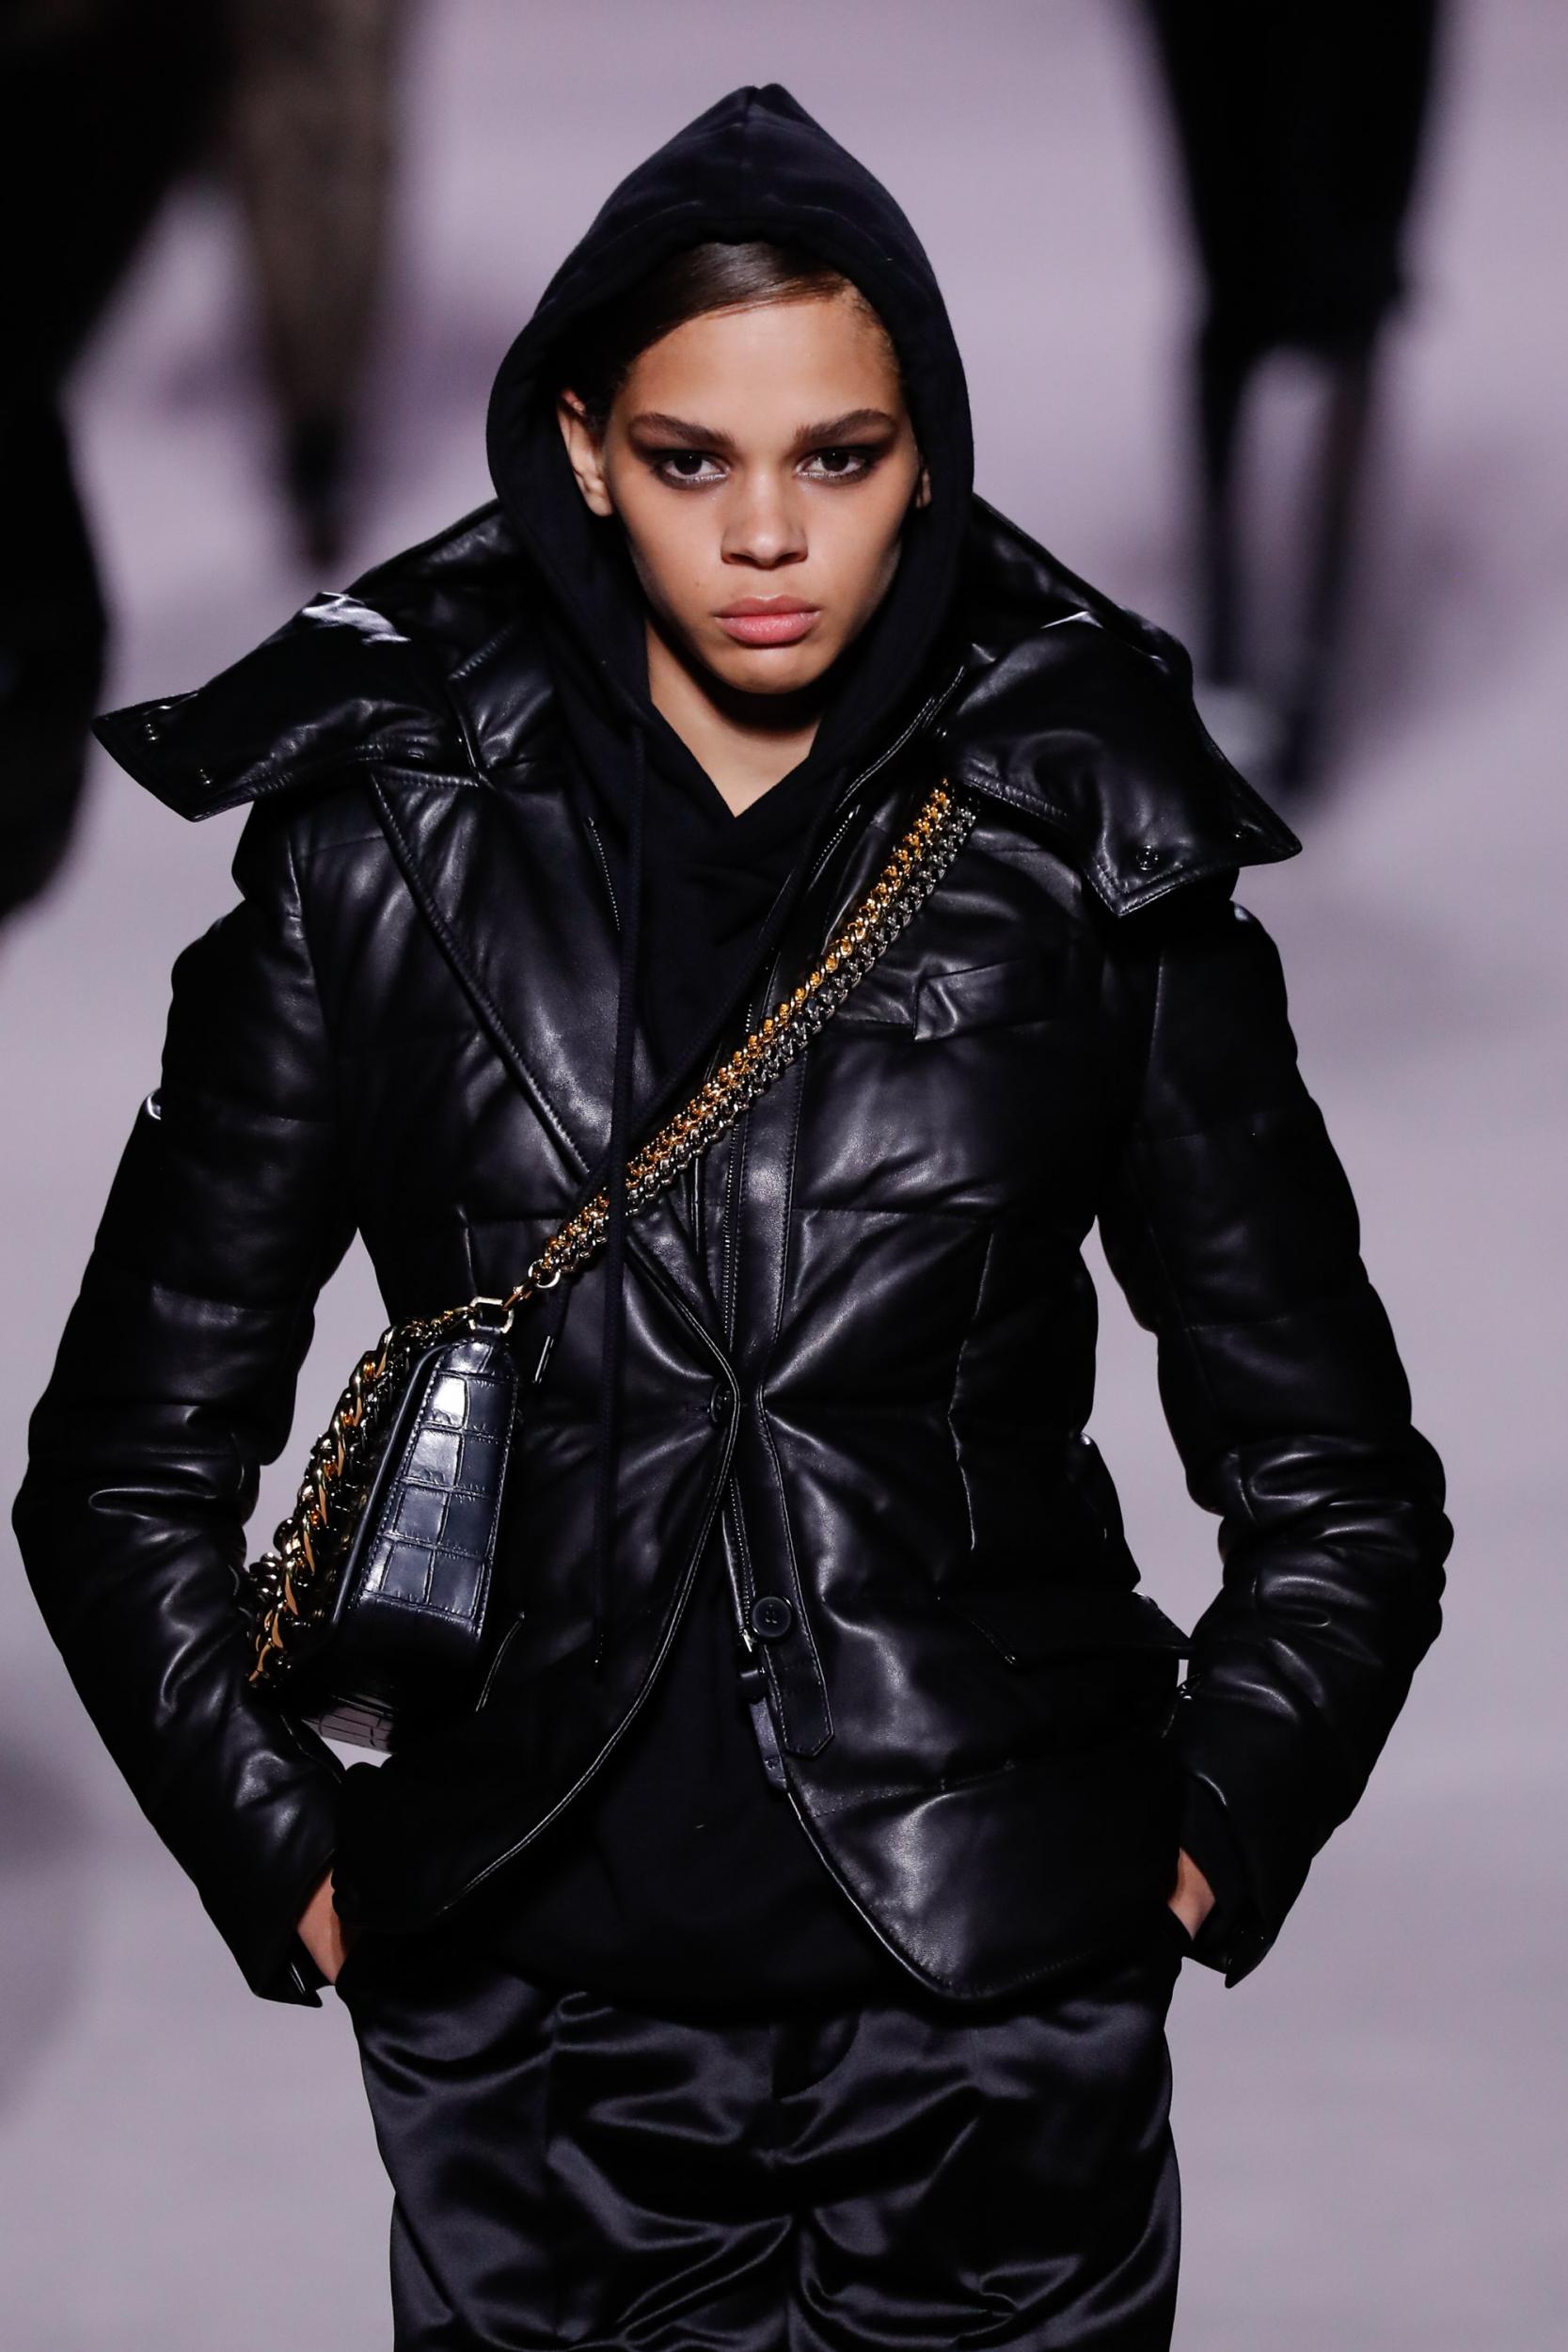 Puffer jackets graced the catwalk at Tom Ford during New York Fashion Week.